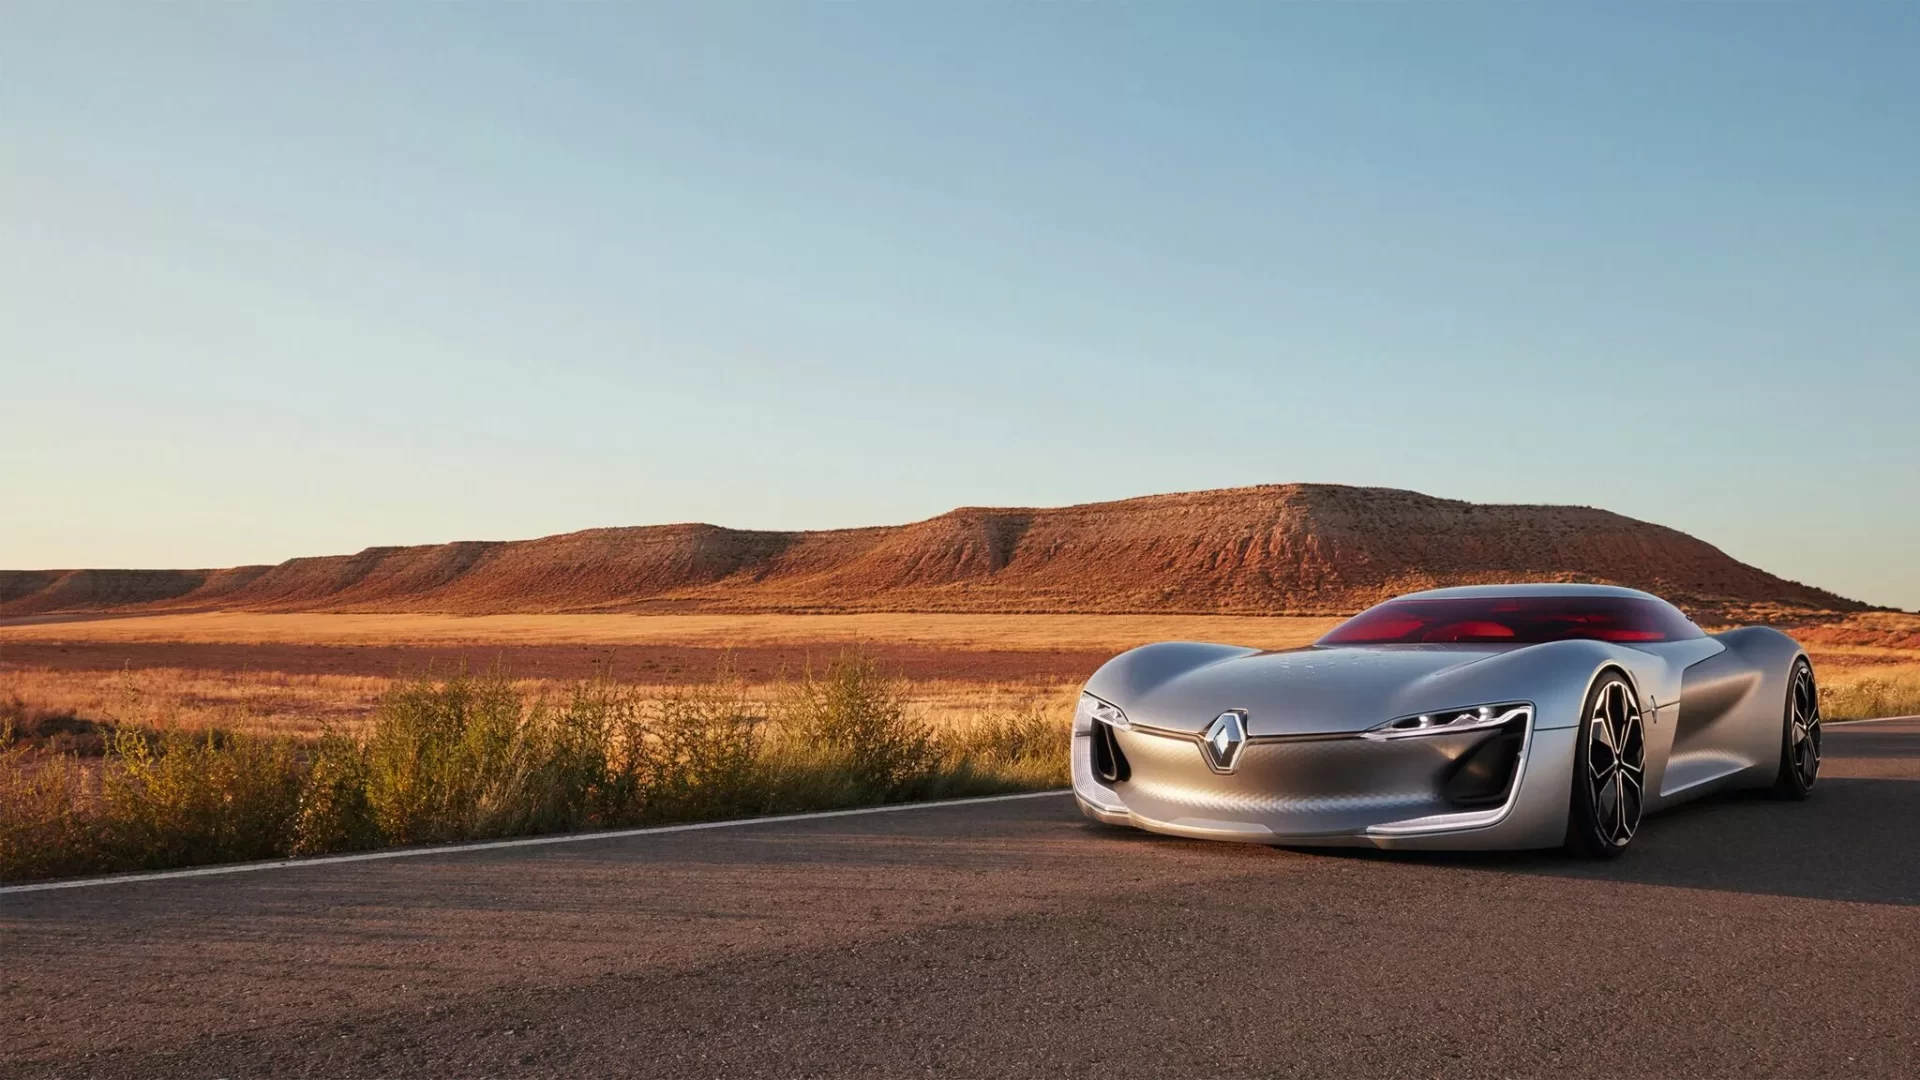 Explore the Renault TREZOR Concept, a 2-seater electric coupé showcasing Renault's vision for future mobility with innovative styling and advanced technology for an exhilarating driving experience.